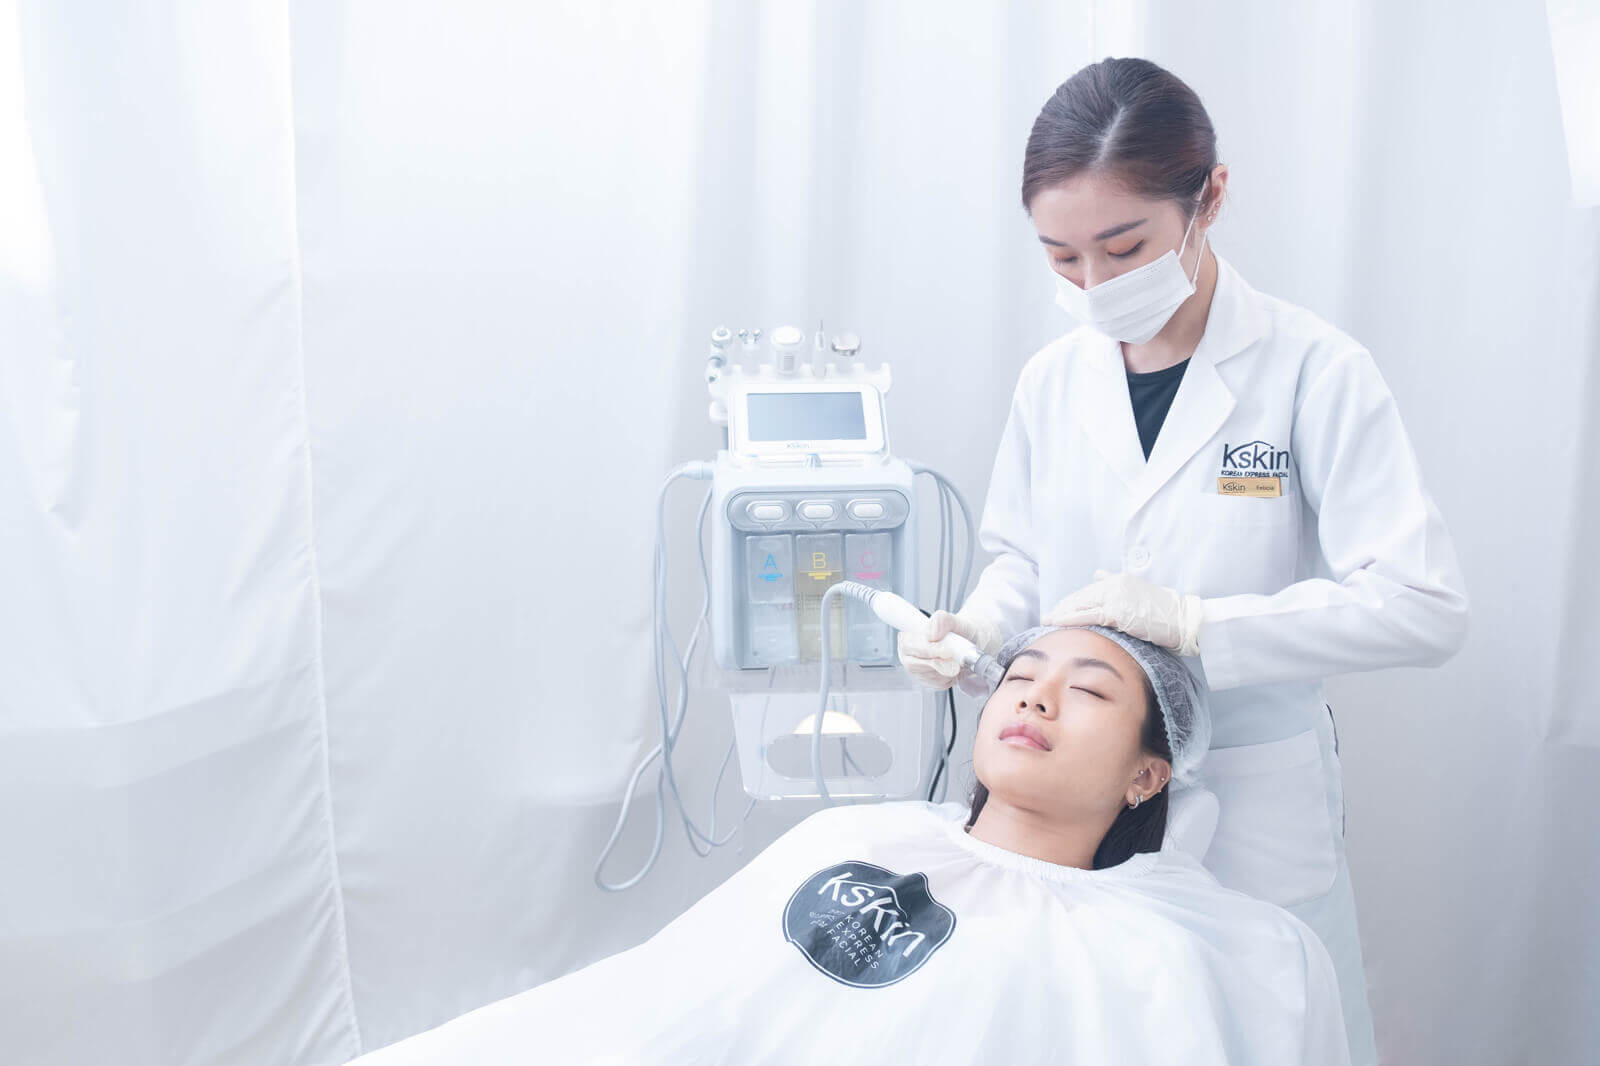 Profitable Korean Express Facial Franchise Opportunities. Low cost set up.